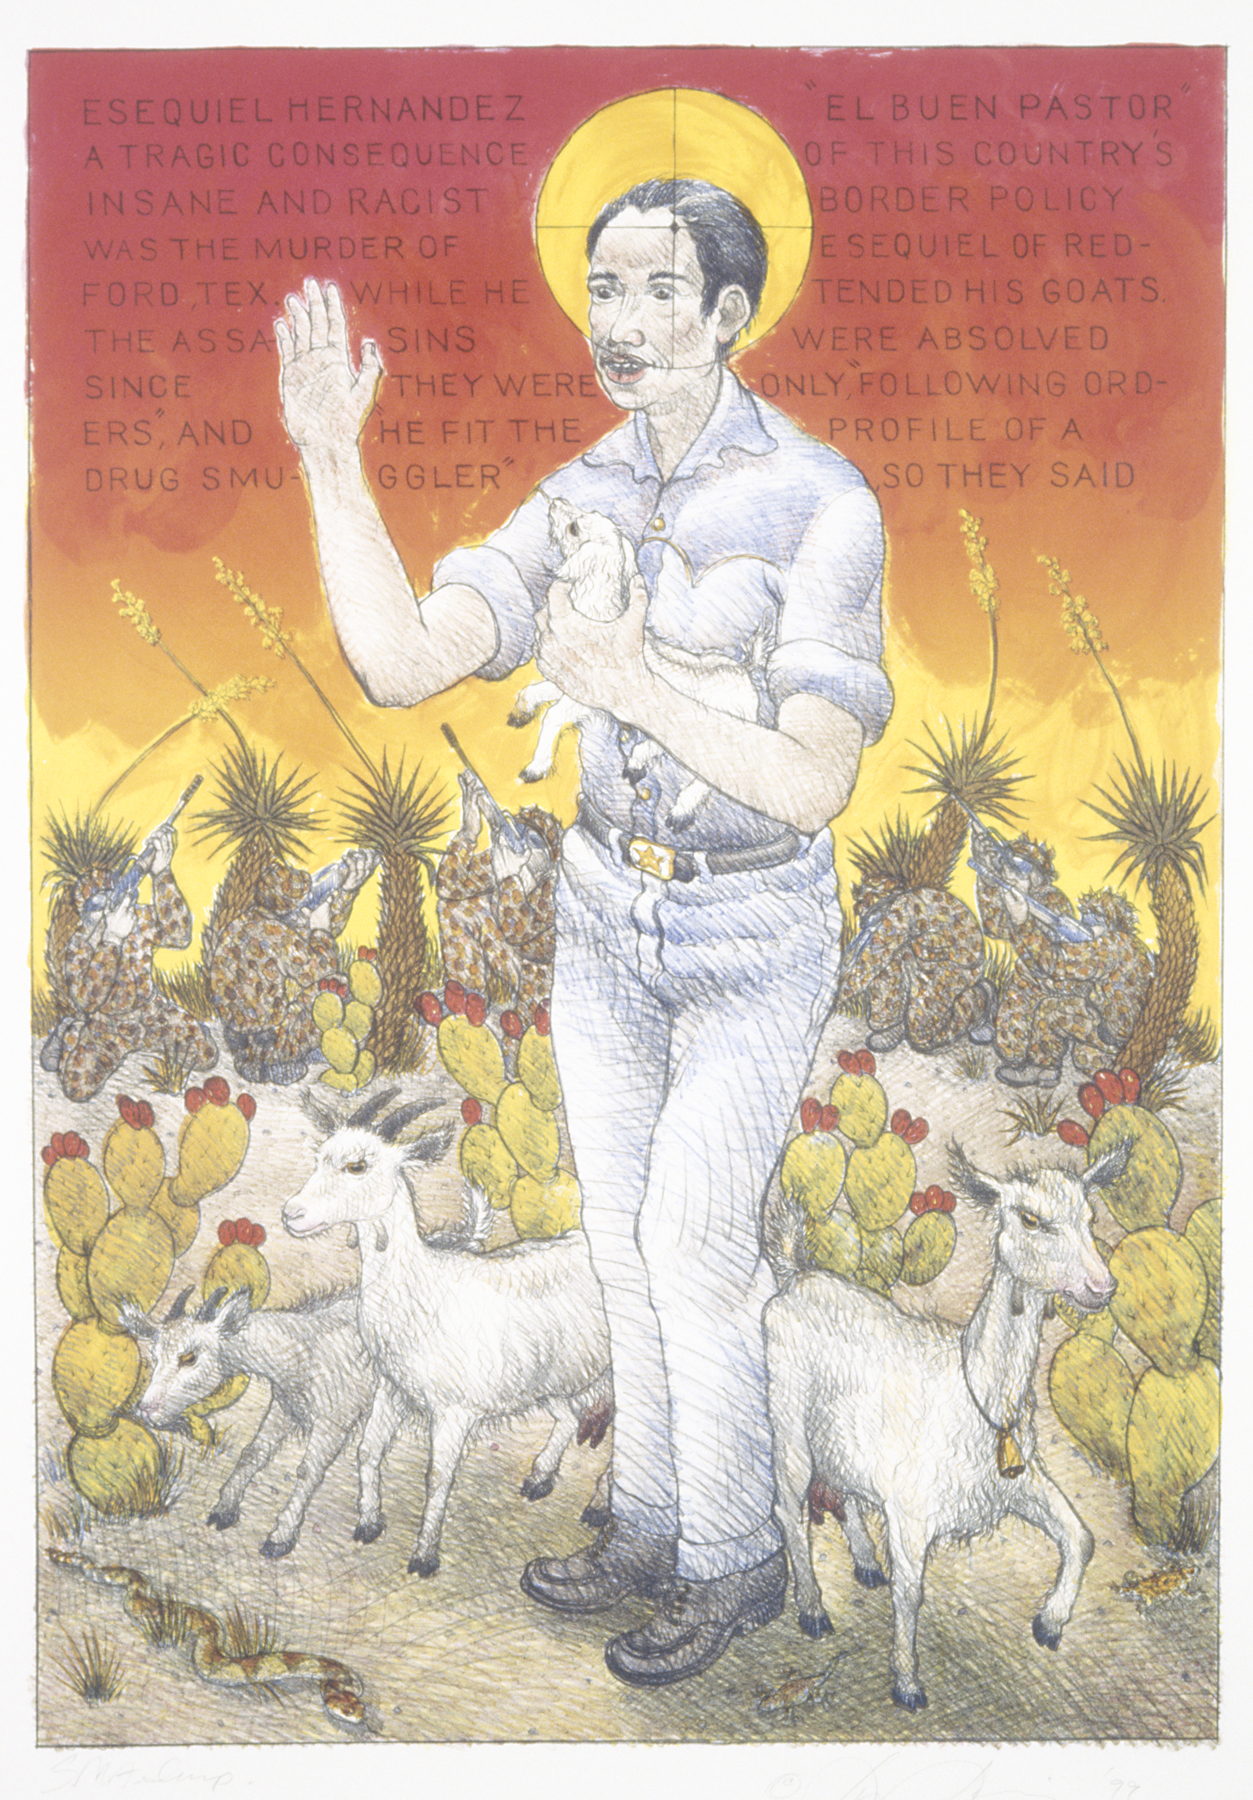 Standing male figure with arm held out in blessing (with crosshairs from a gun superimposed on his face), there are three goats at the man's feet and he is holding a baby goat. Inscription above him describing the incident that inspired Jimenez to make this image. Background is somewhat barren and rendered in bright oranges, reds, and yellows.